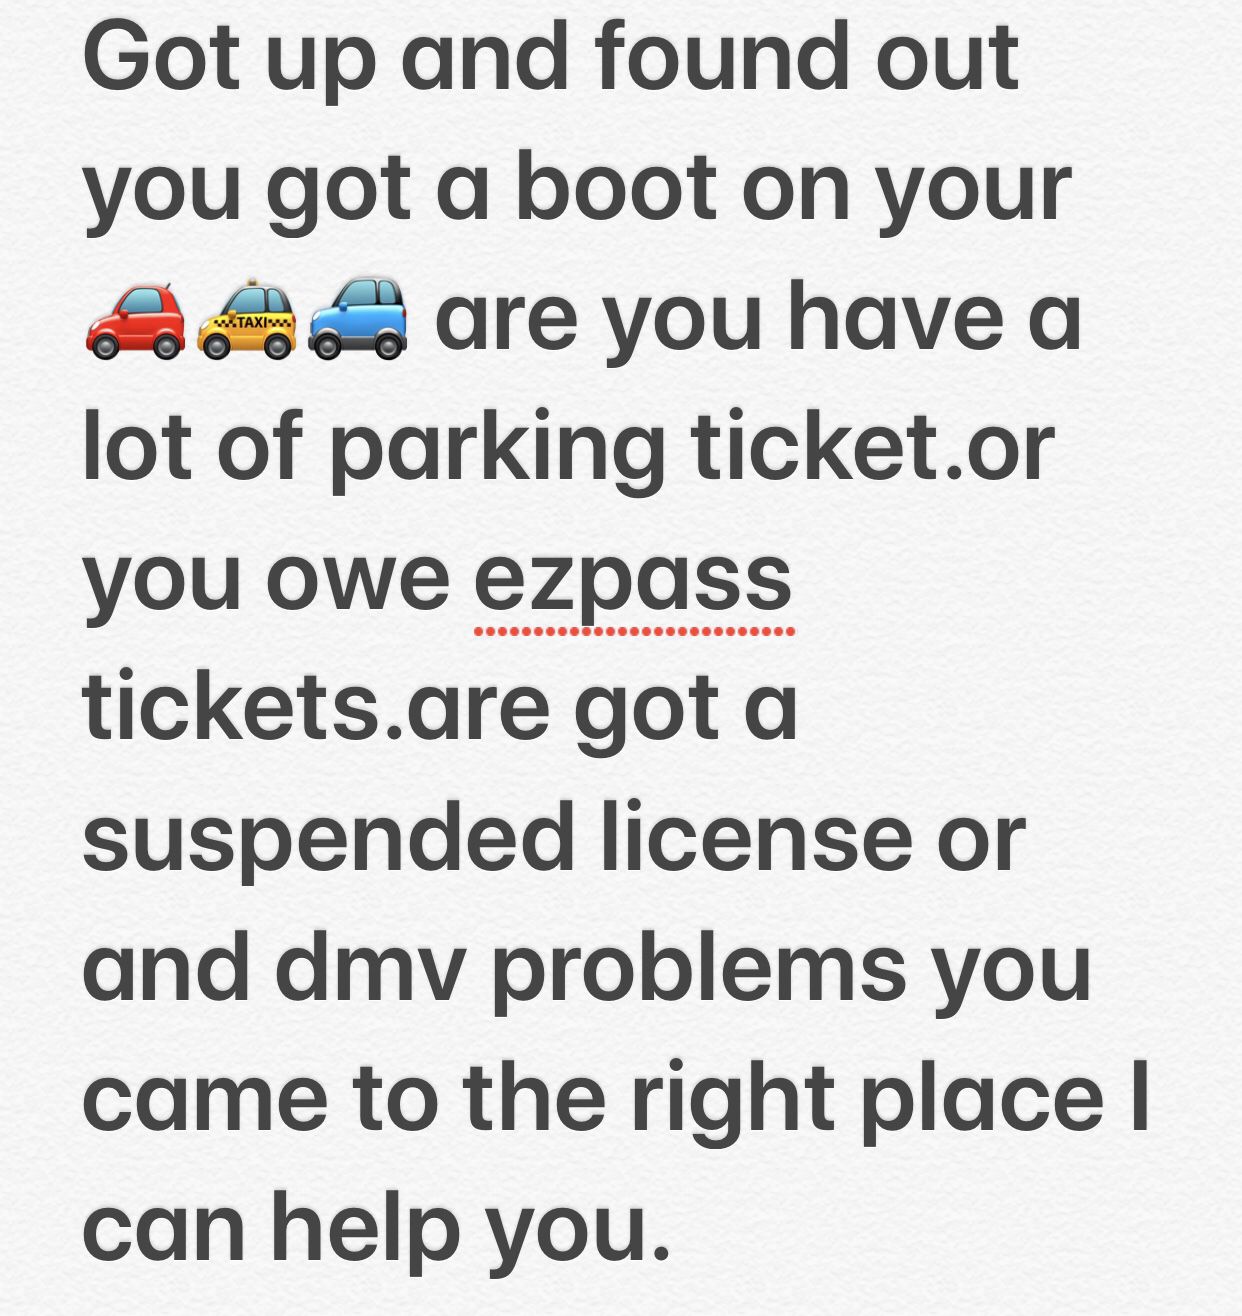 Need help with your parking ticket